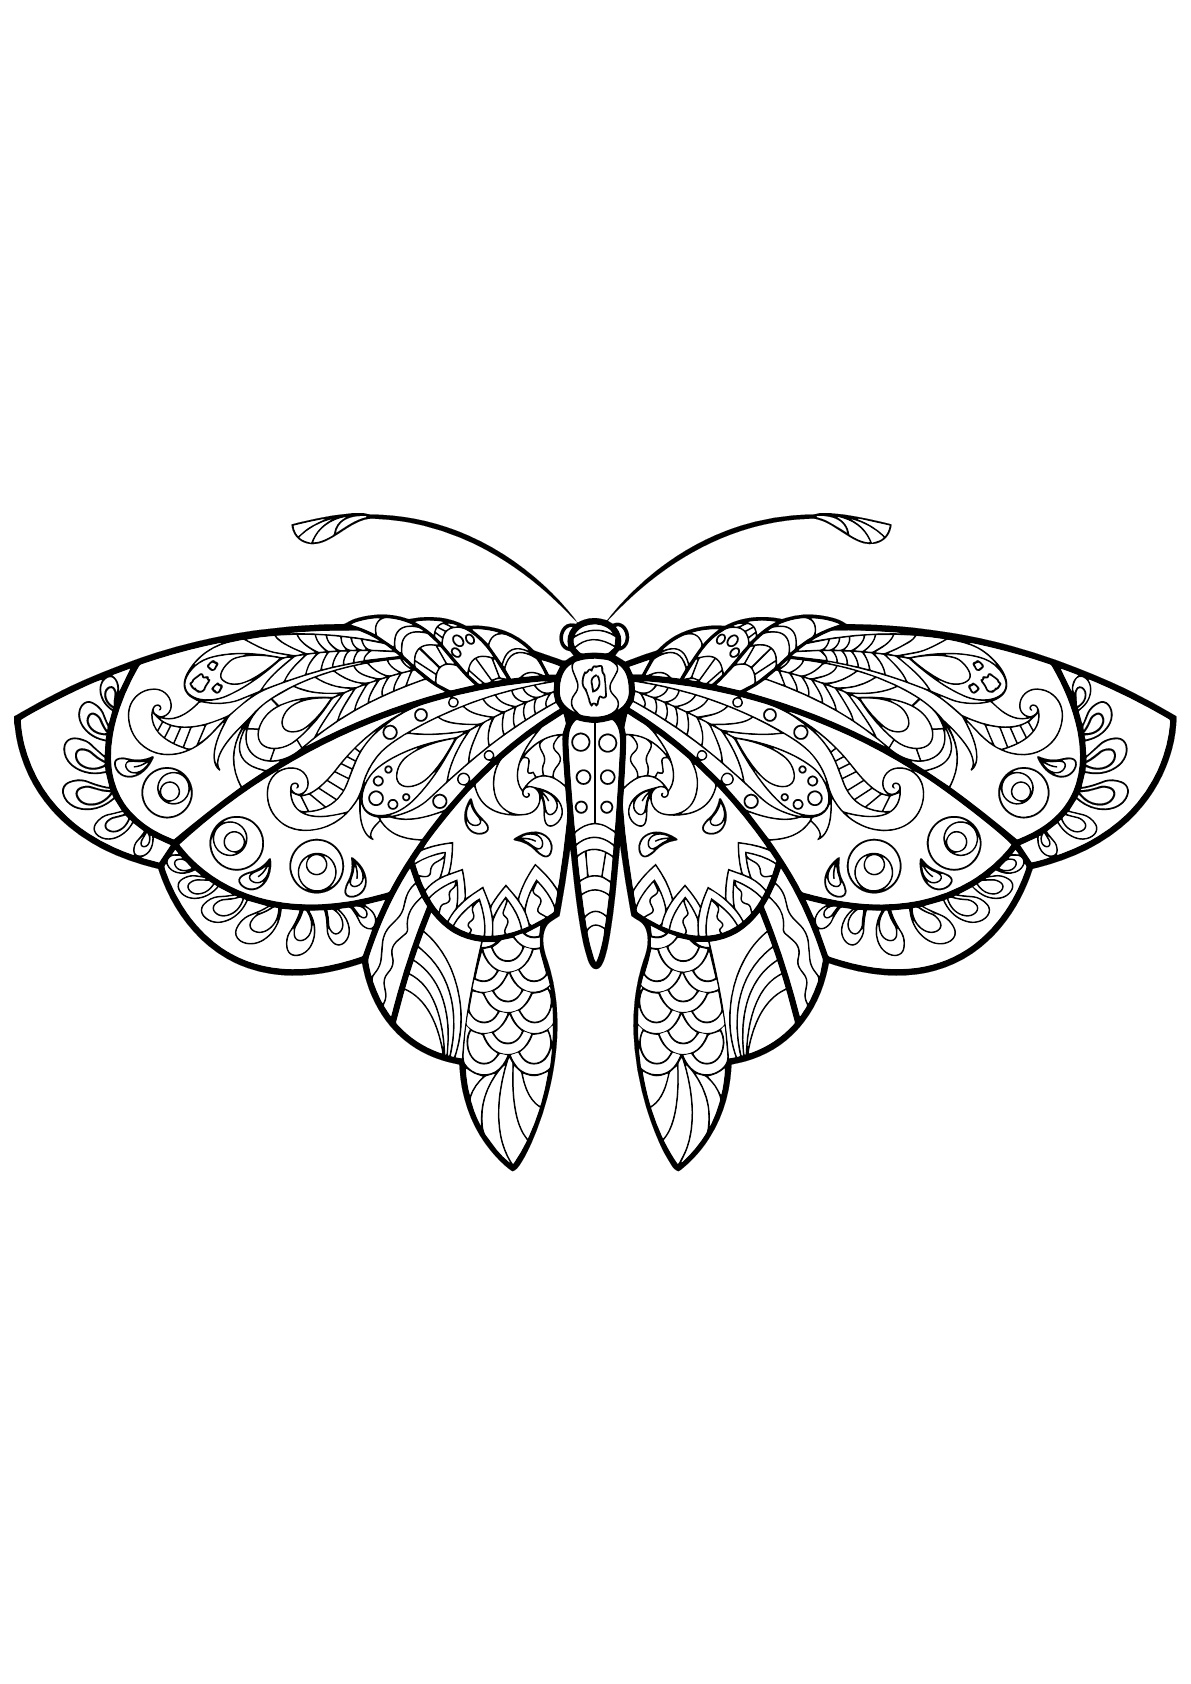 Butterfly beautiful patterns 1 - Butterflies & insects Adult Coloring Pages